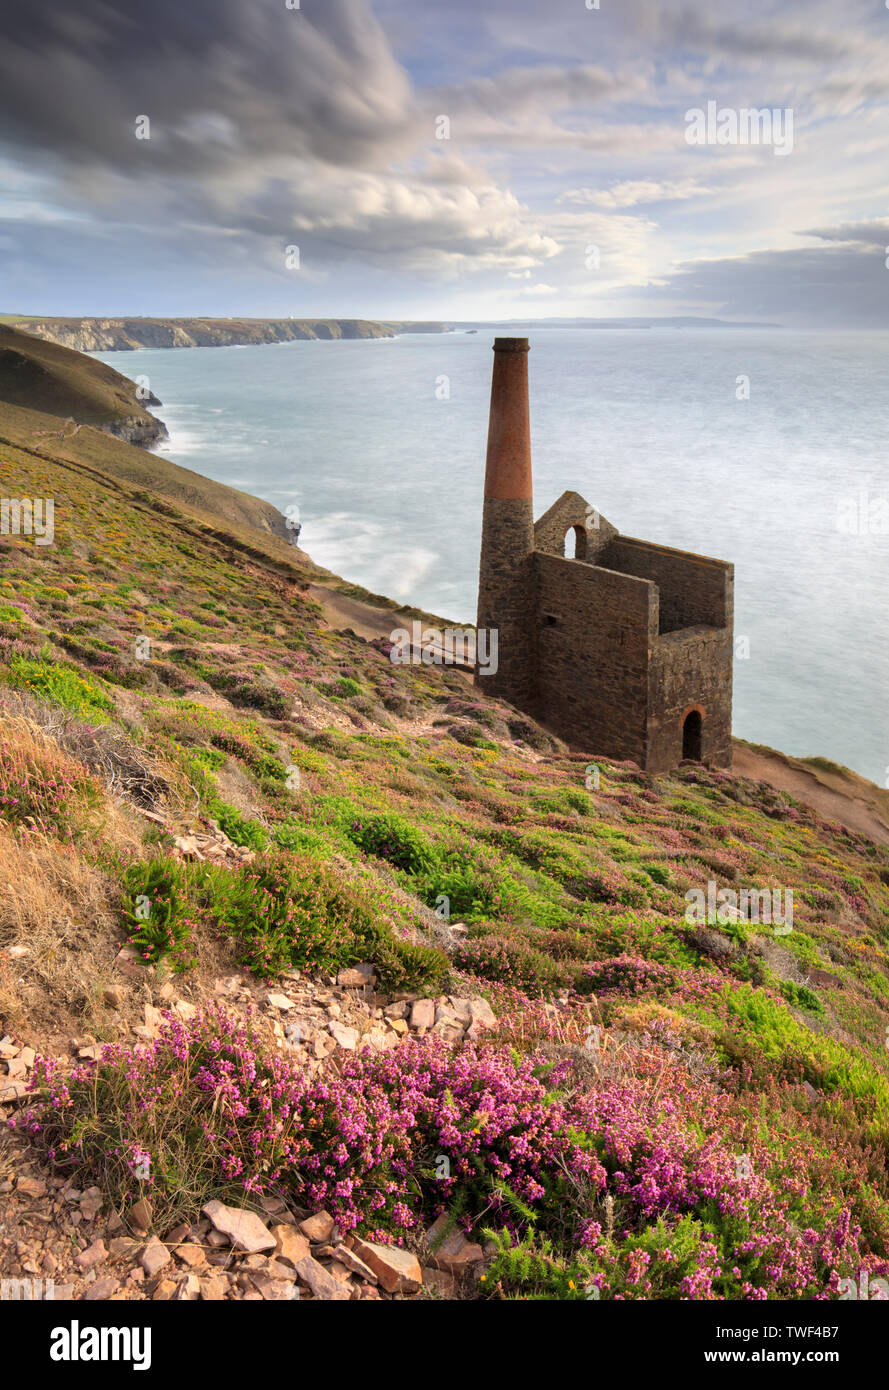 The Towanroath Pumping Engine House at Wheal Coates. Stock Photo